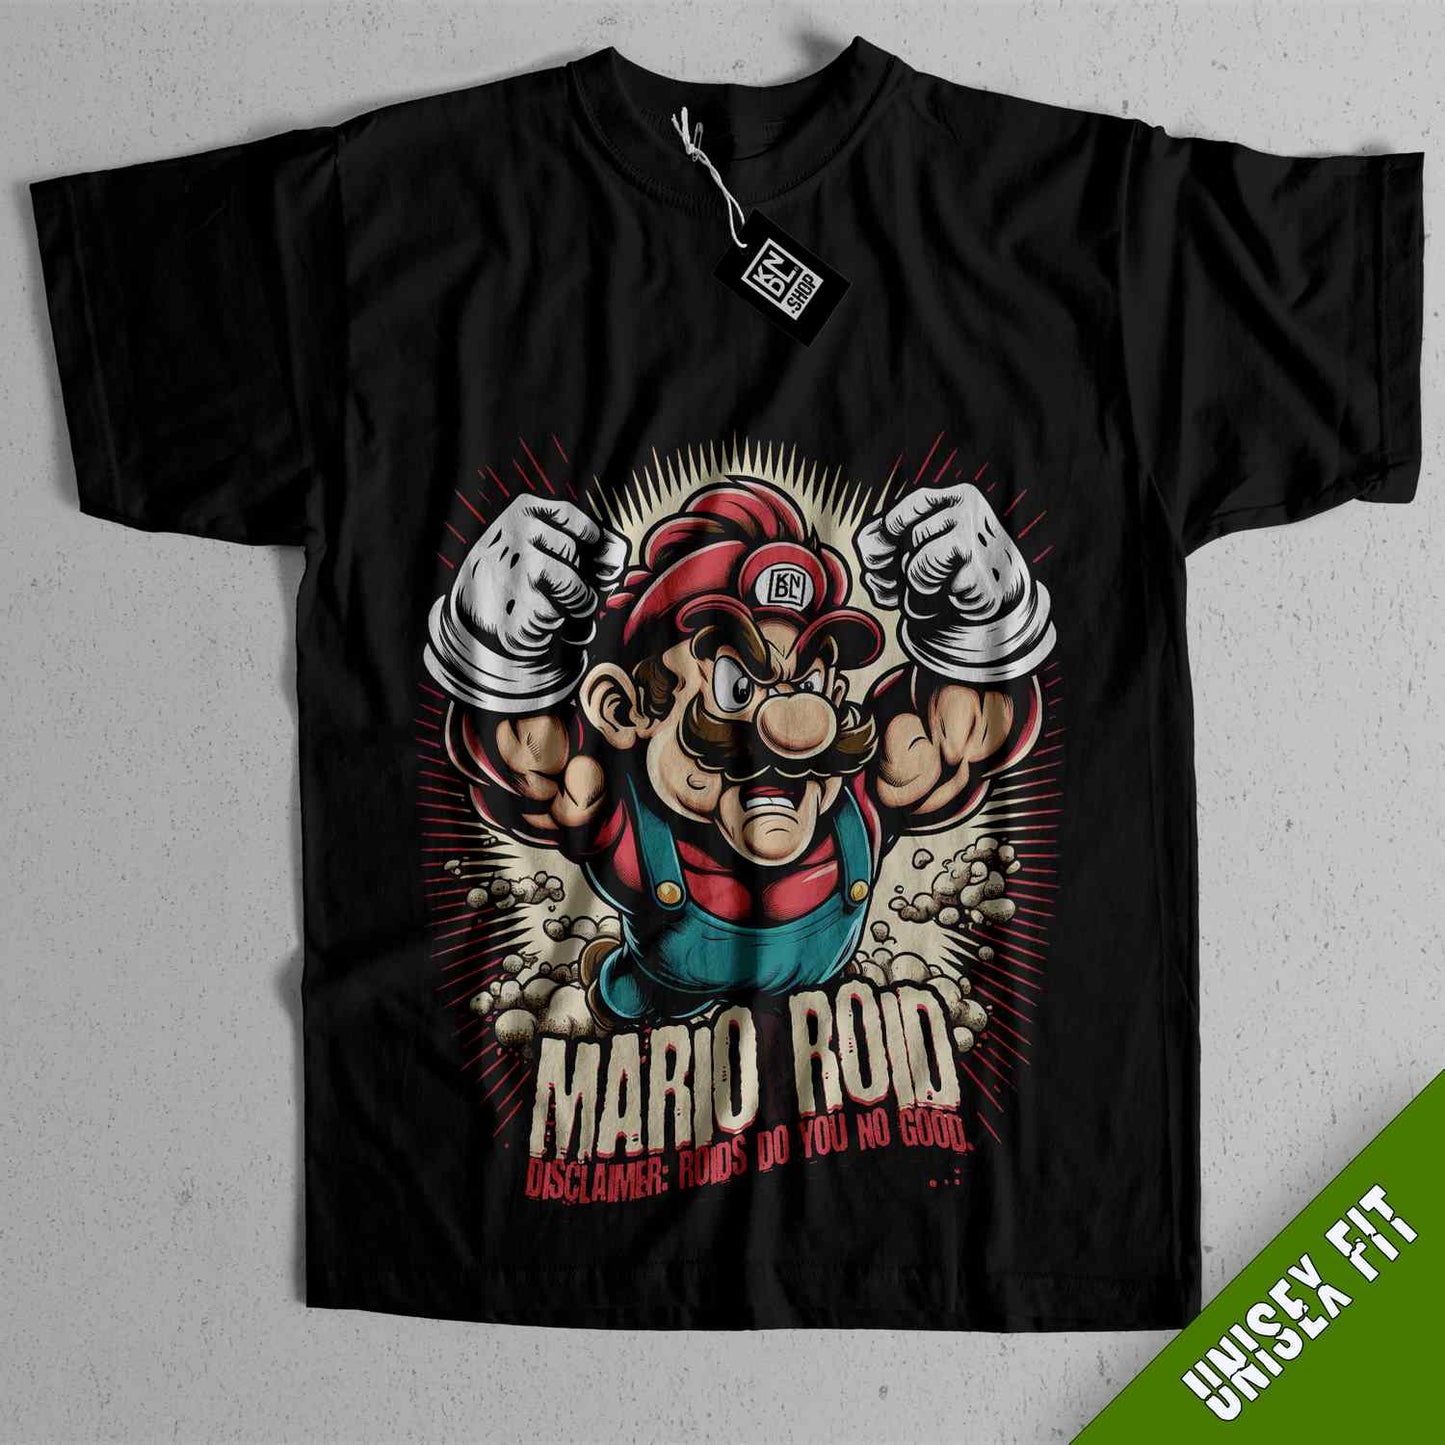 a black shirt with an image of a mario bros character